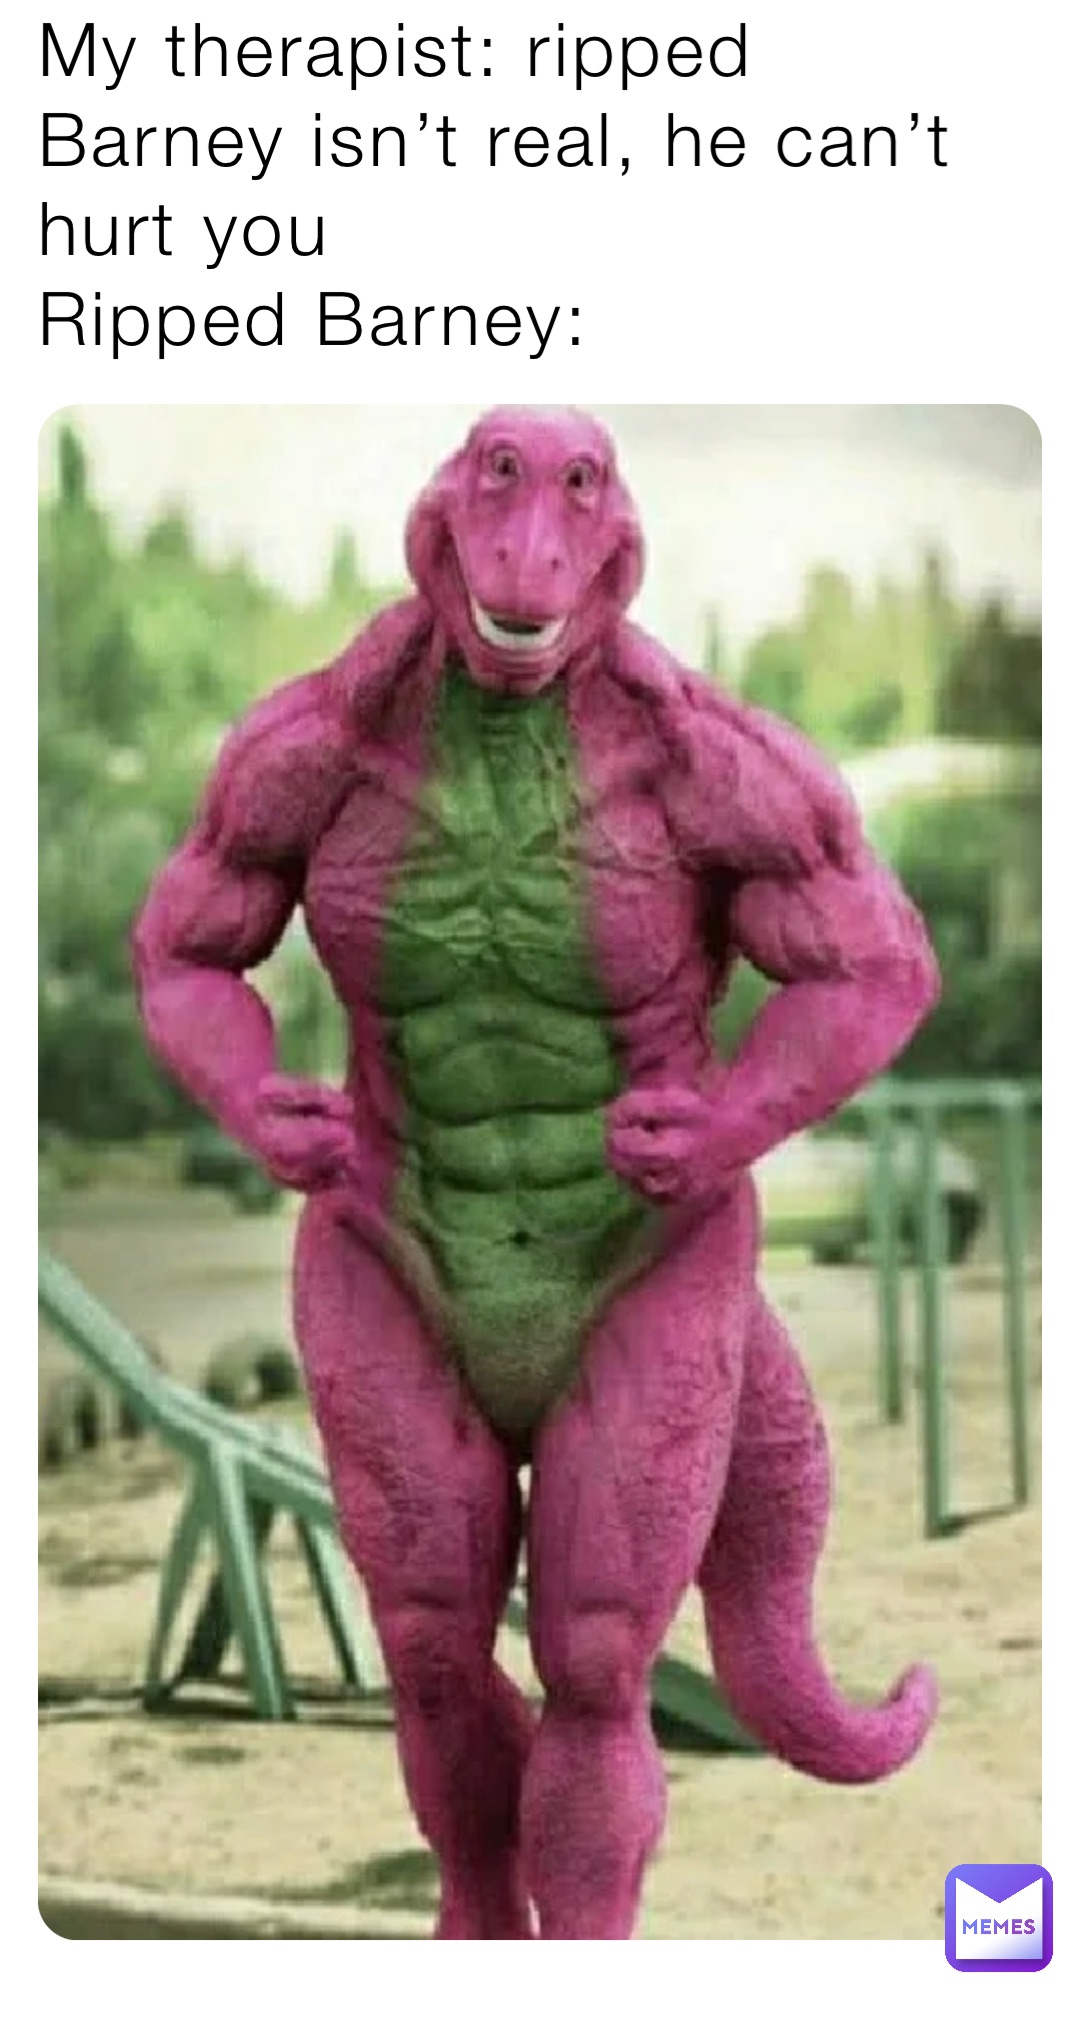 My therapist: ripped Barney isn’t real, he can’t hurt you
Ripped Barney: